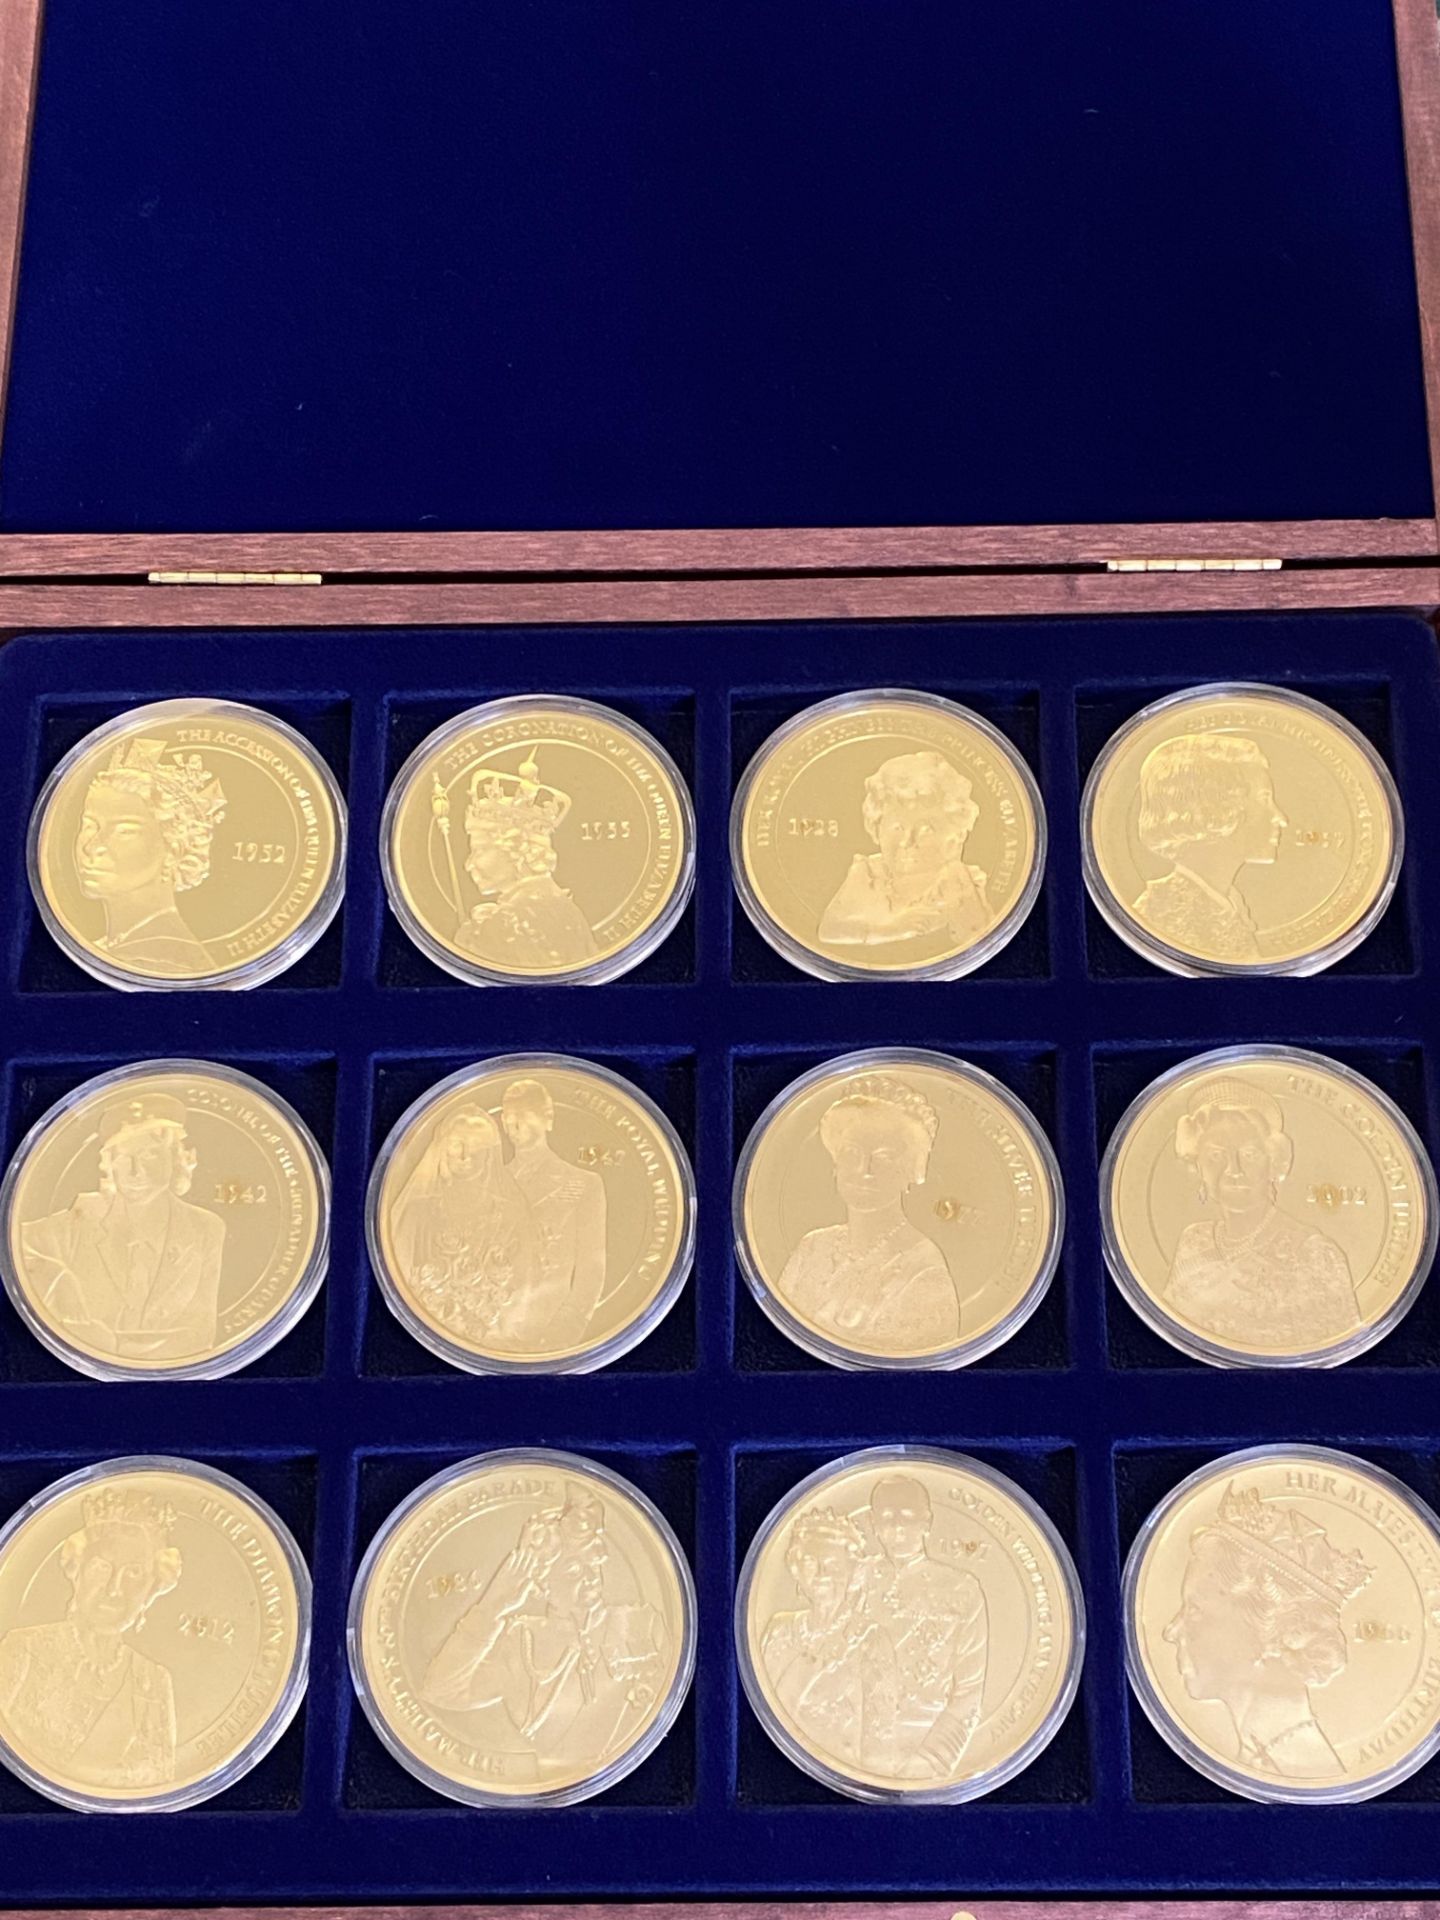 Twelve gold plated Portraits of the Queen Diamond Jubilee coins in presentation box - Image 4 of 4